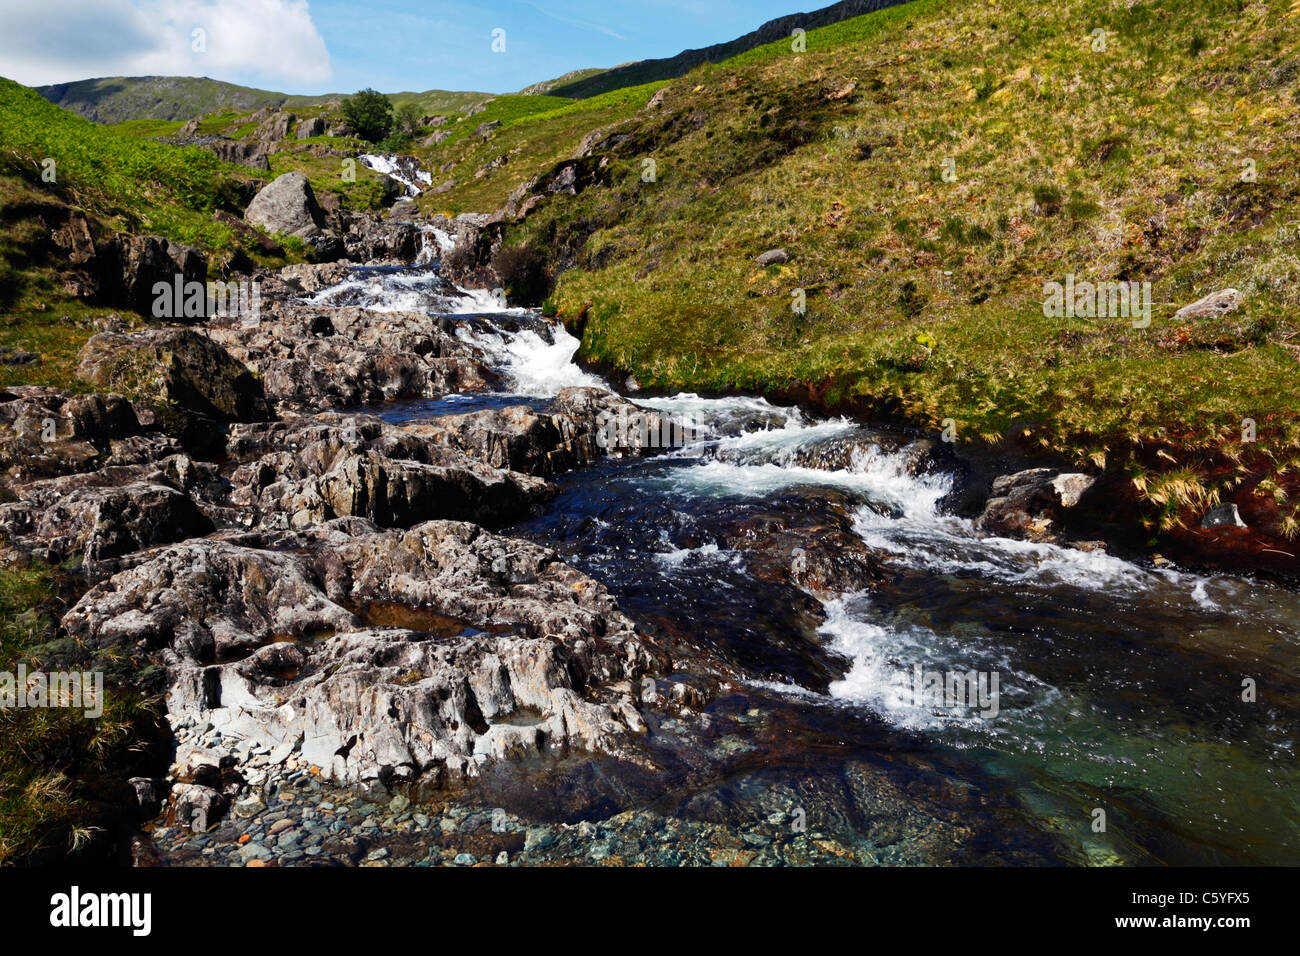 Waterfall on Greenburn Beck between Langdale and Coniston in the Lake District, Cumbria, England. Stock Photo